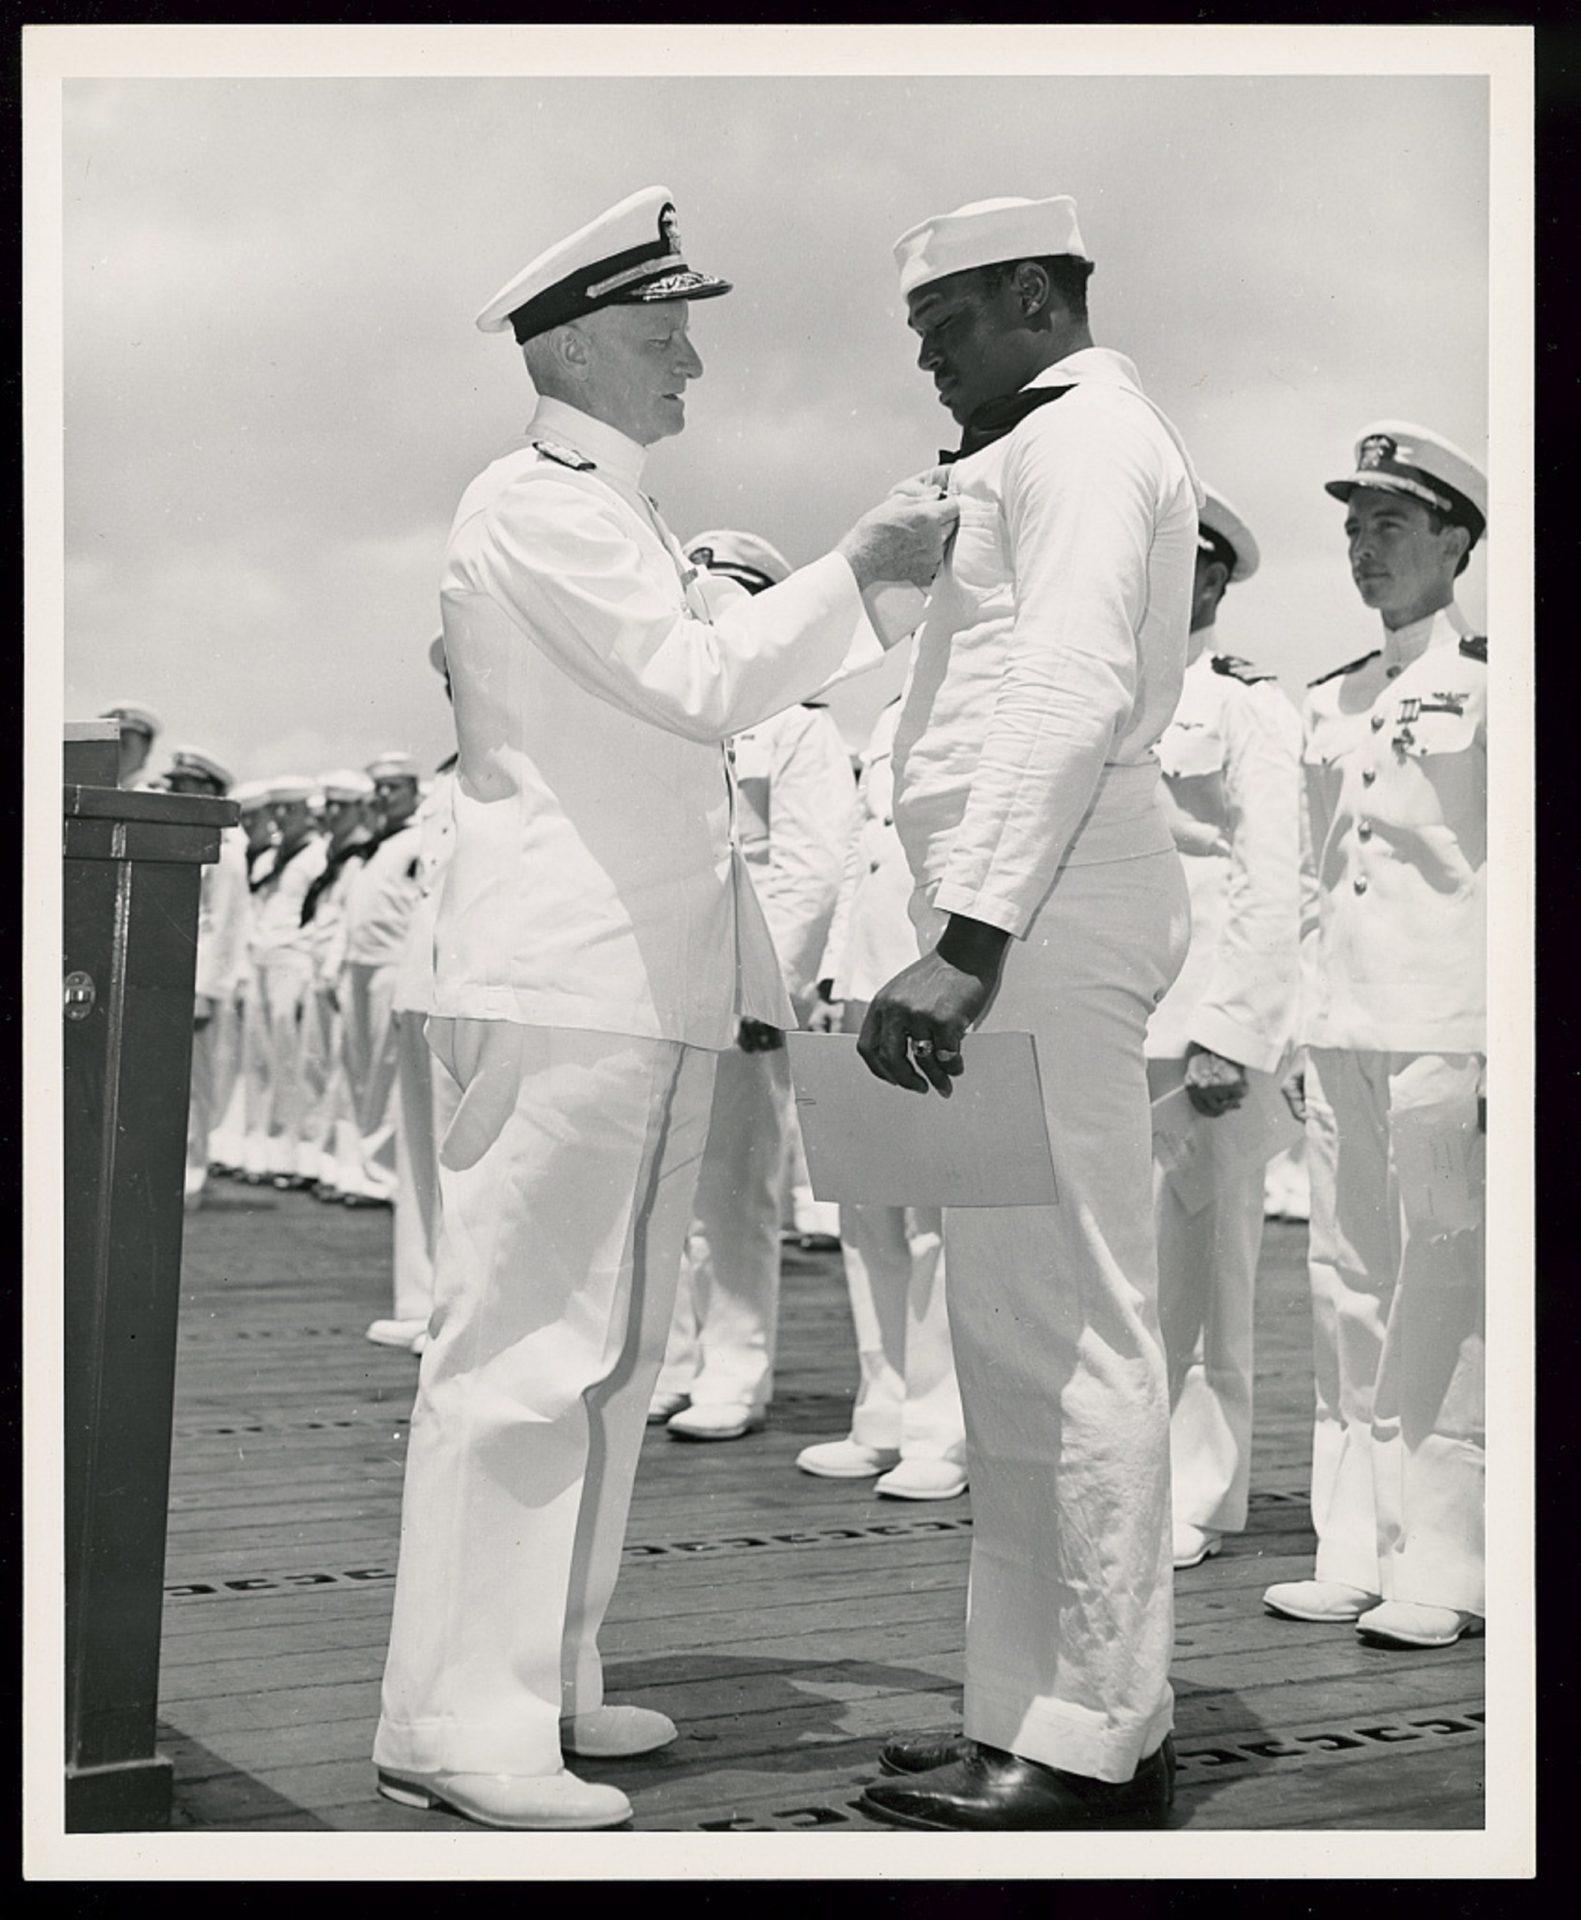 Admiral Chester W. Nimitz, Commander-in-Chief of the U.S. Pacific Fleet, pins the Navy Cross on Miller at a ceremony on board a U.S. Navy warship in Pearl Harbor on May 27, 1942. 